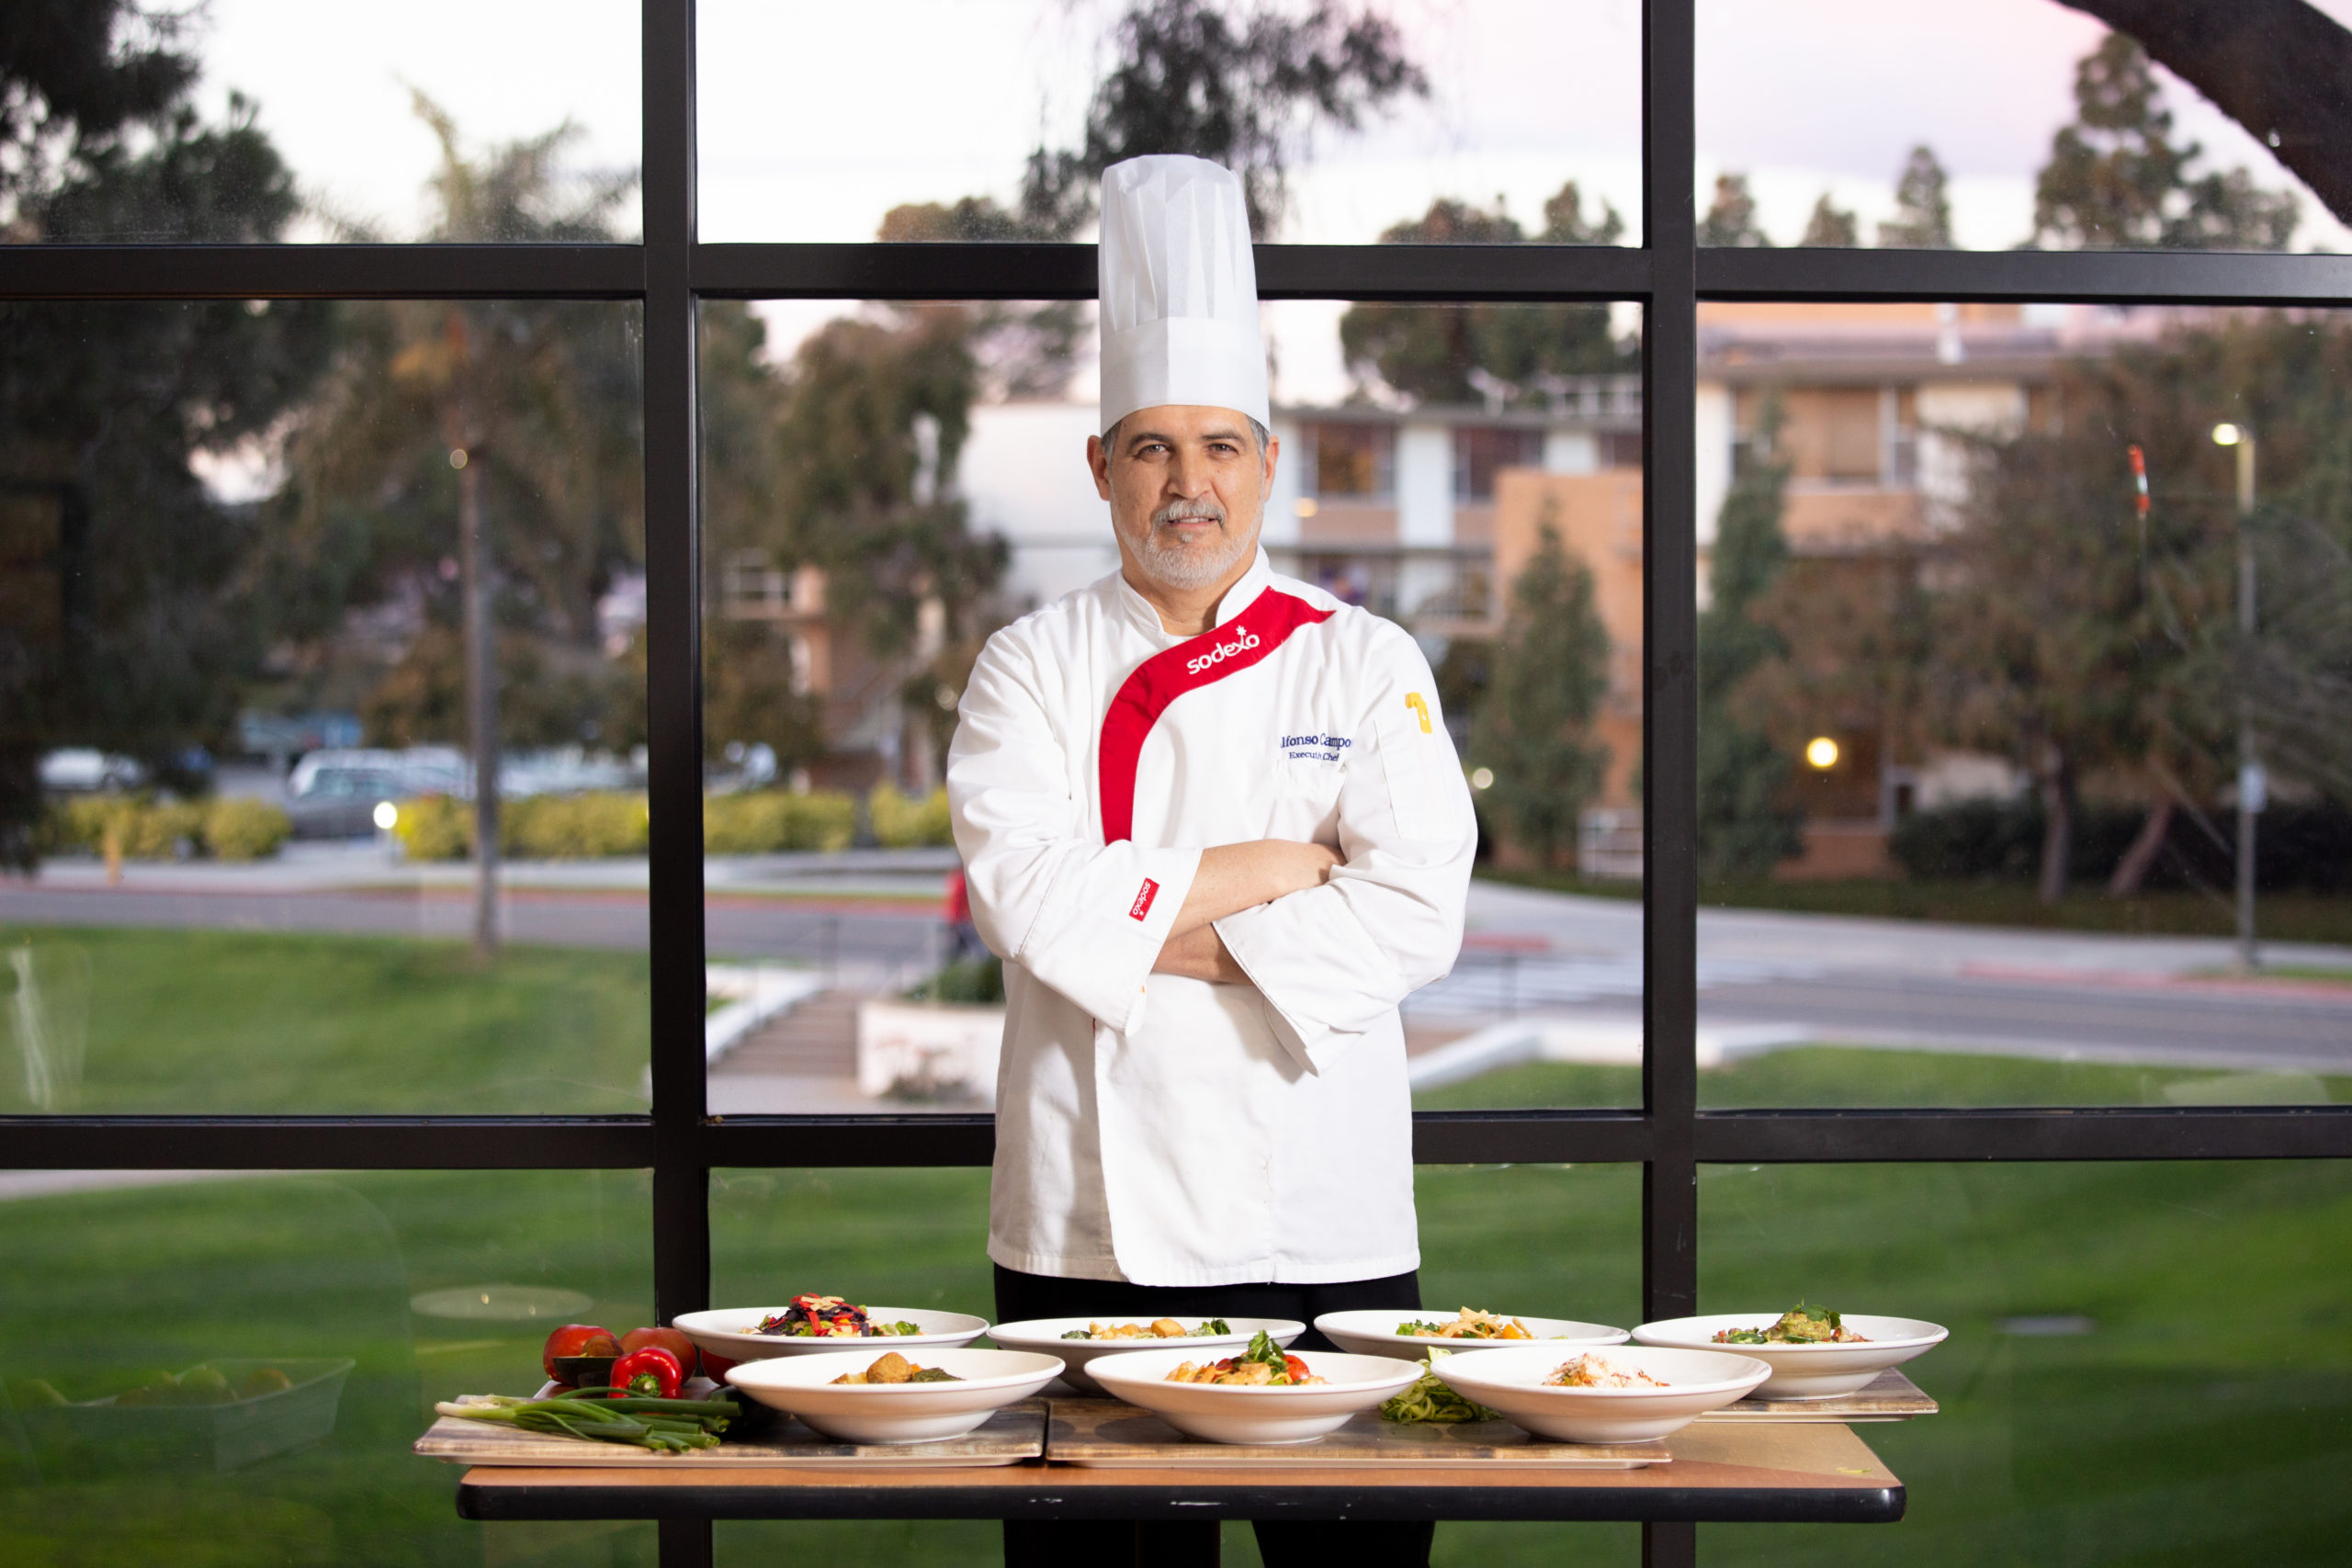 Sodexo 7612 scaled - Dining Services Adjusts to Conditions to Offer a Full Menu